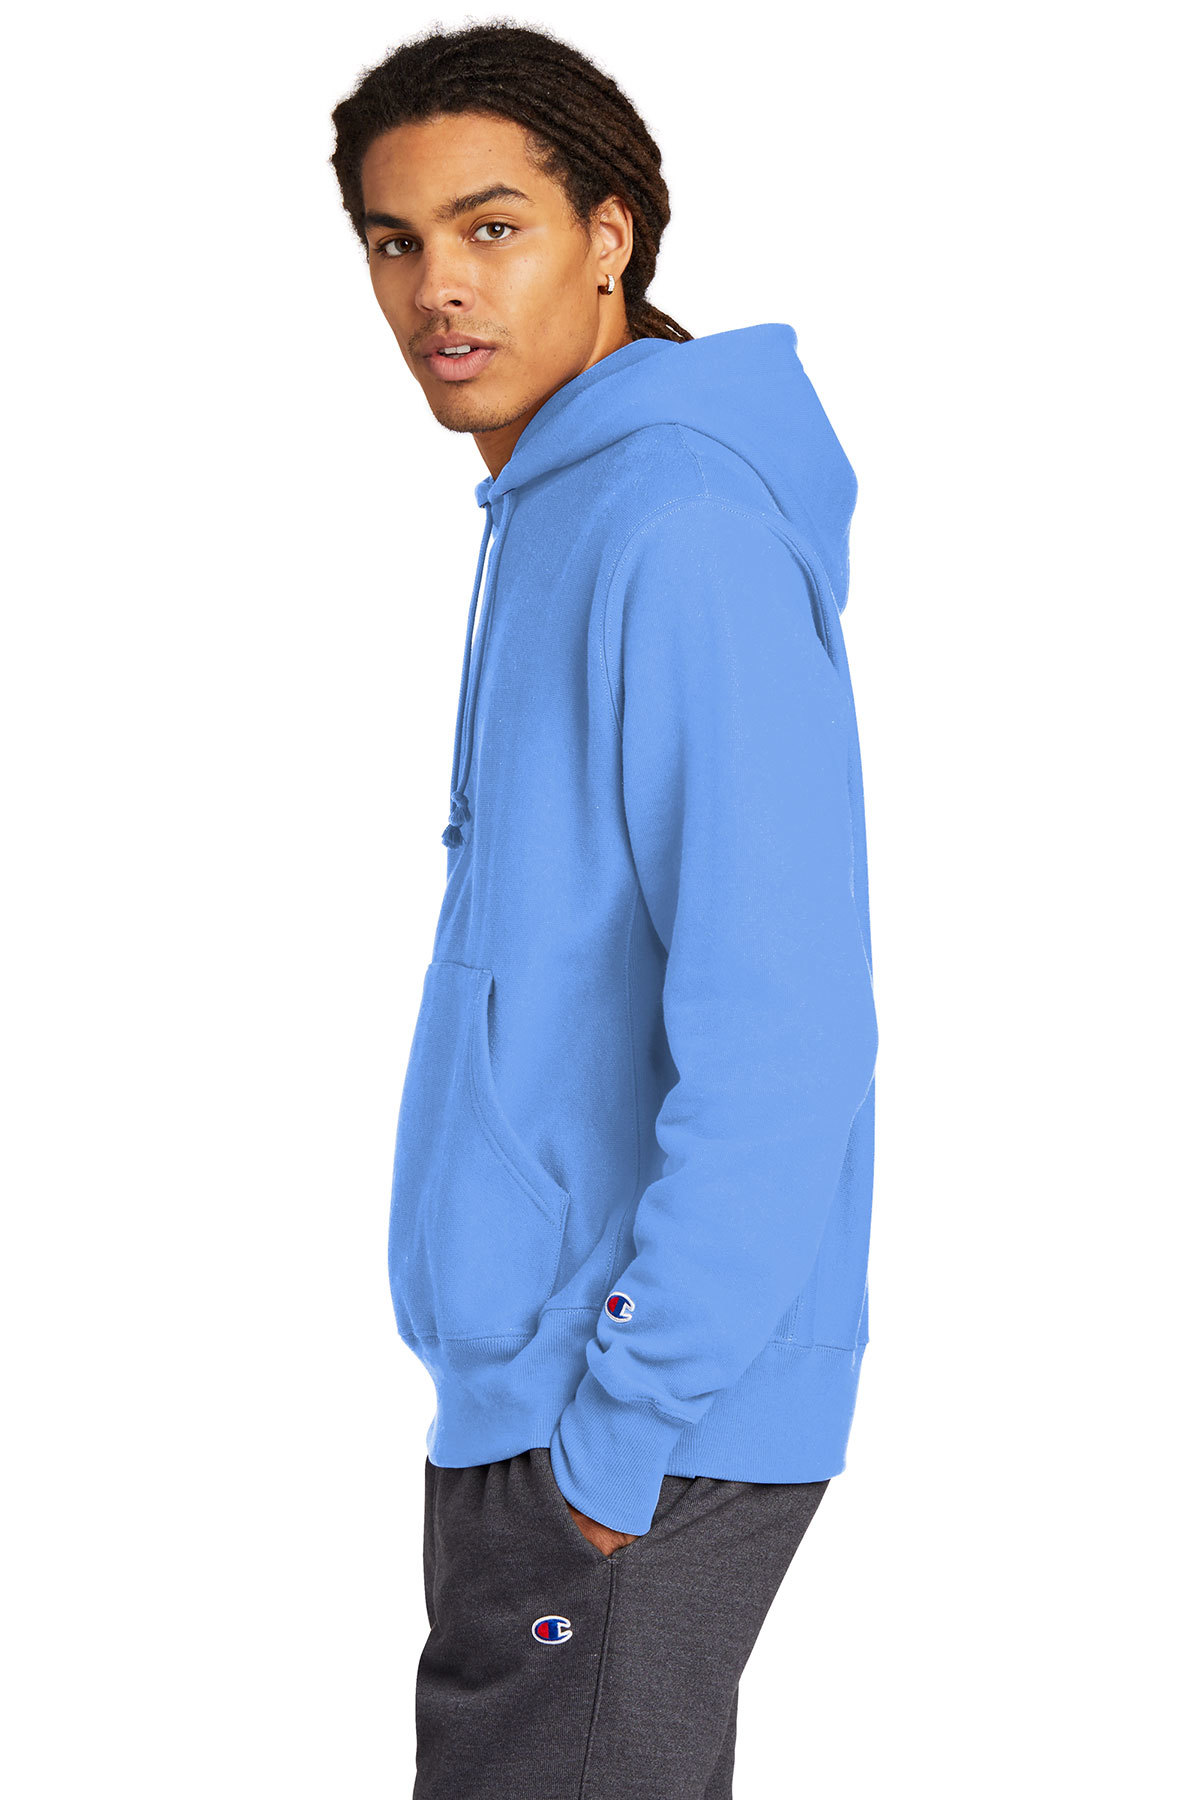 Champion Reverse Weave Hooded Sweatshirt | Product | Company Casuals